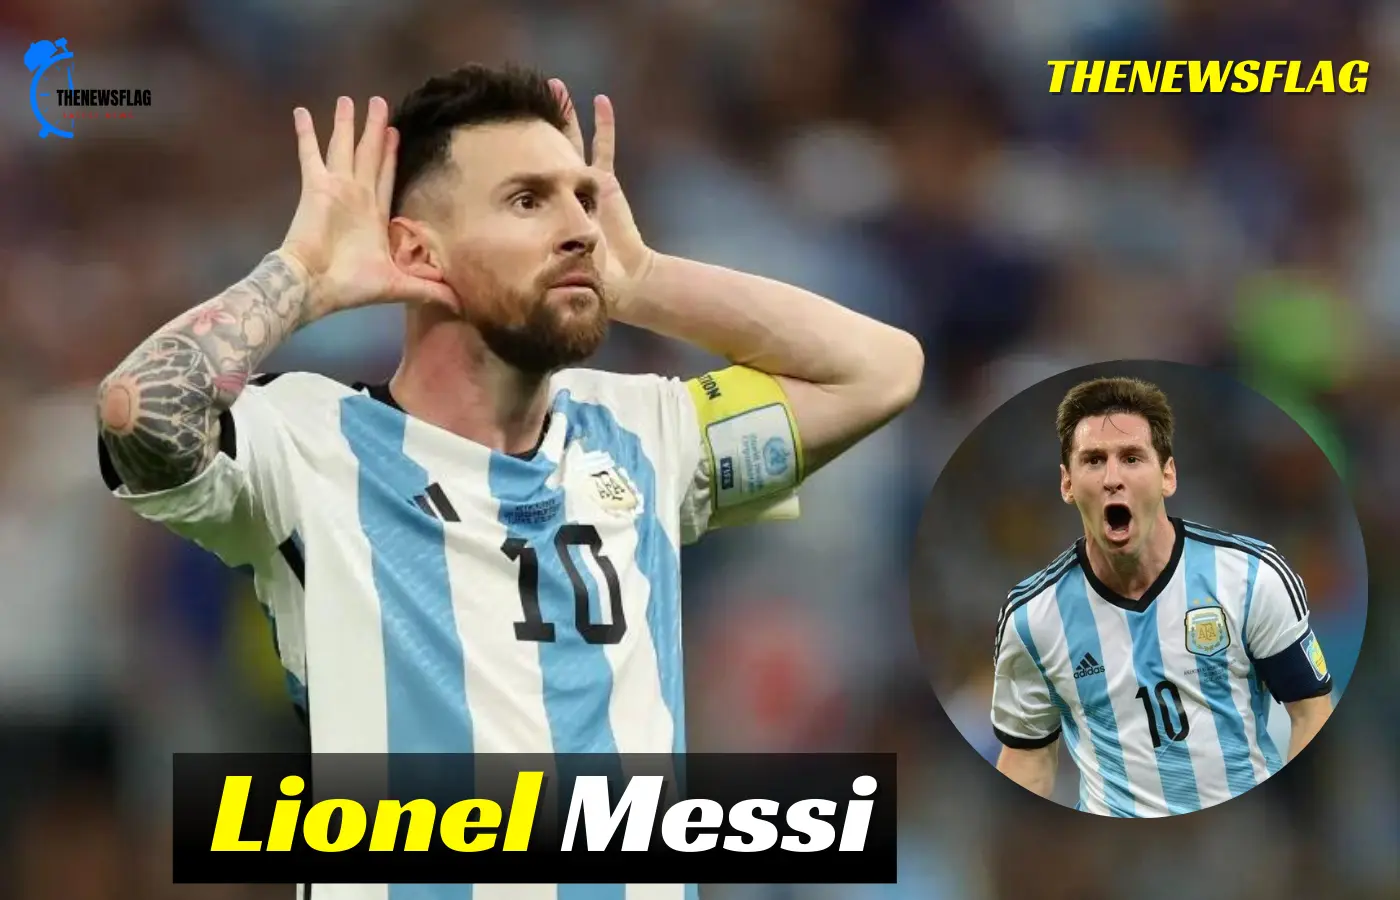 Why did Lionel Messi choose not to represent Argentina in their international meet with Costa Rica?